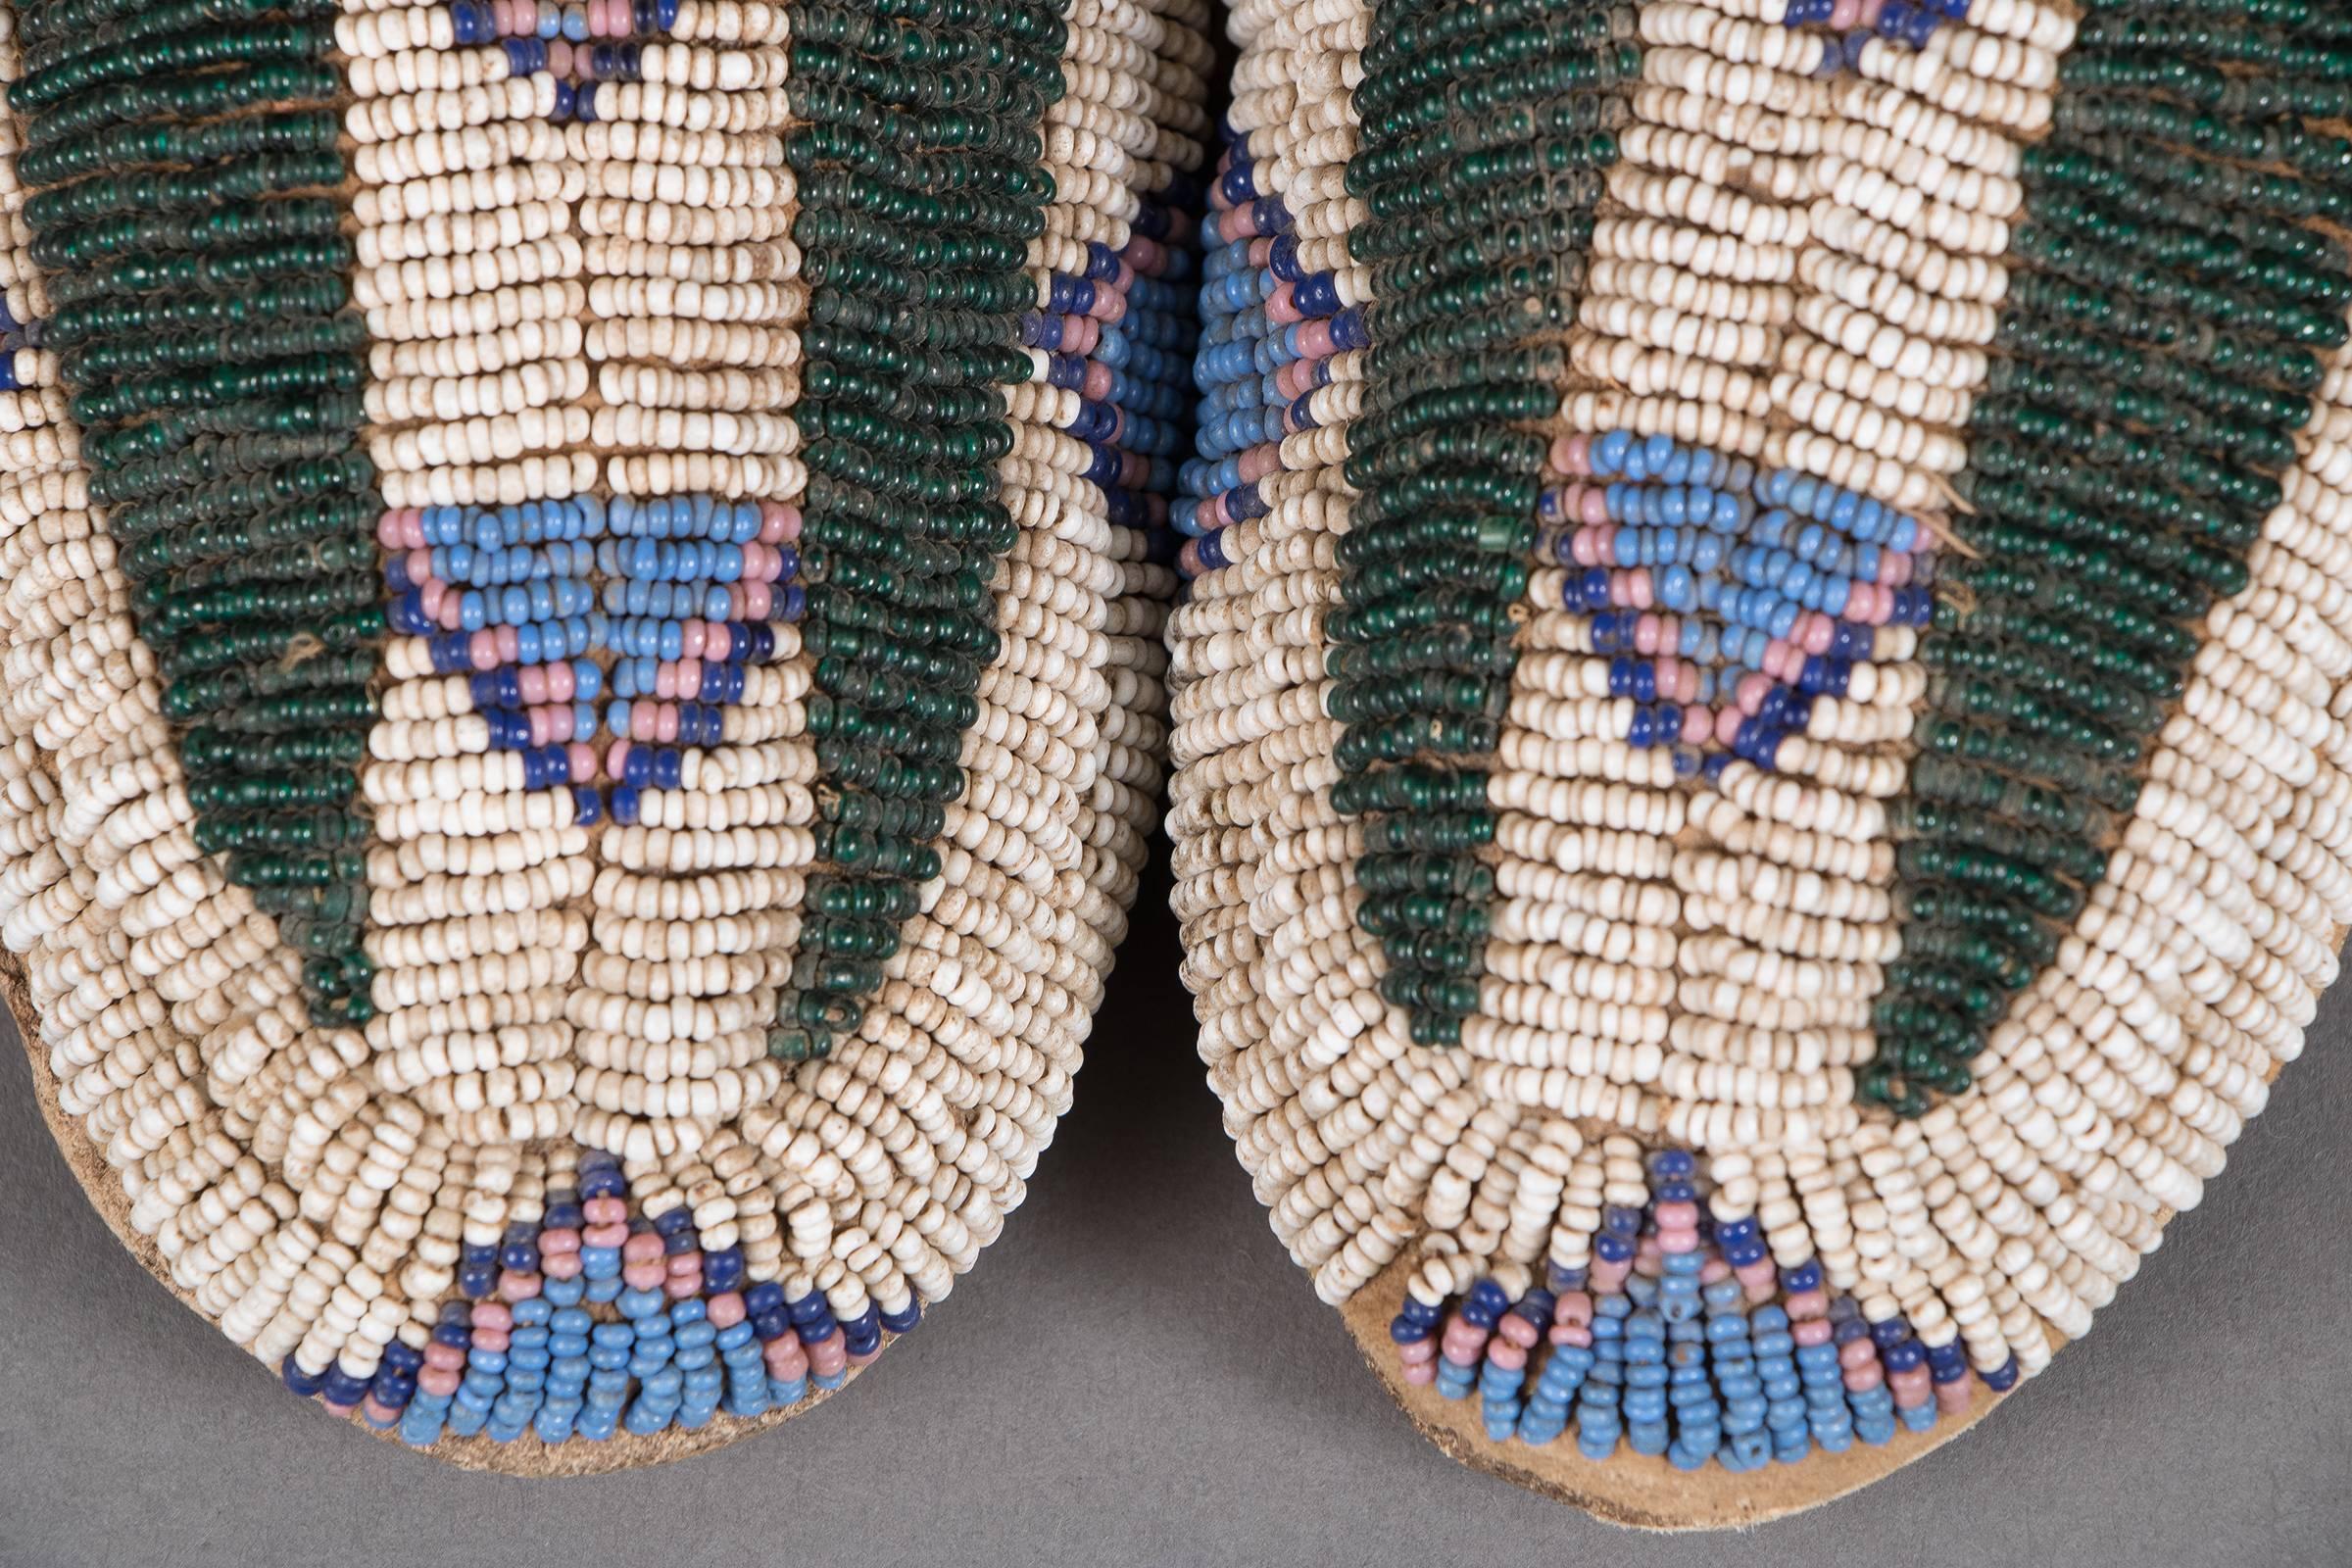 Hide Antique Native American Beaded Child's Moccasins, Arapaho, 19th Century